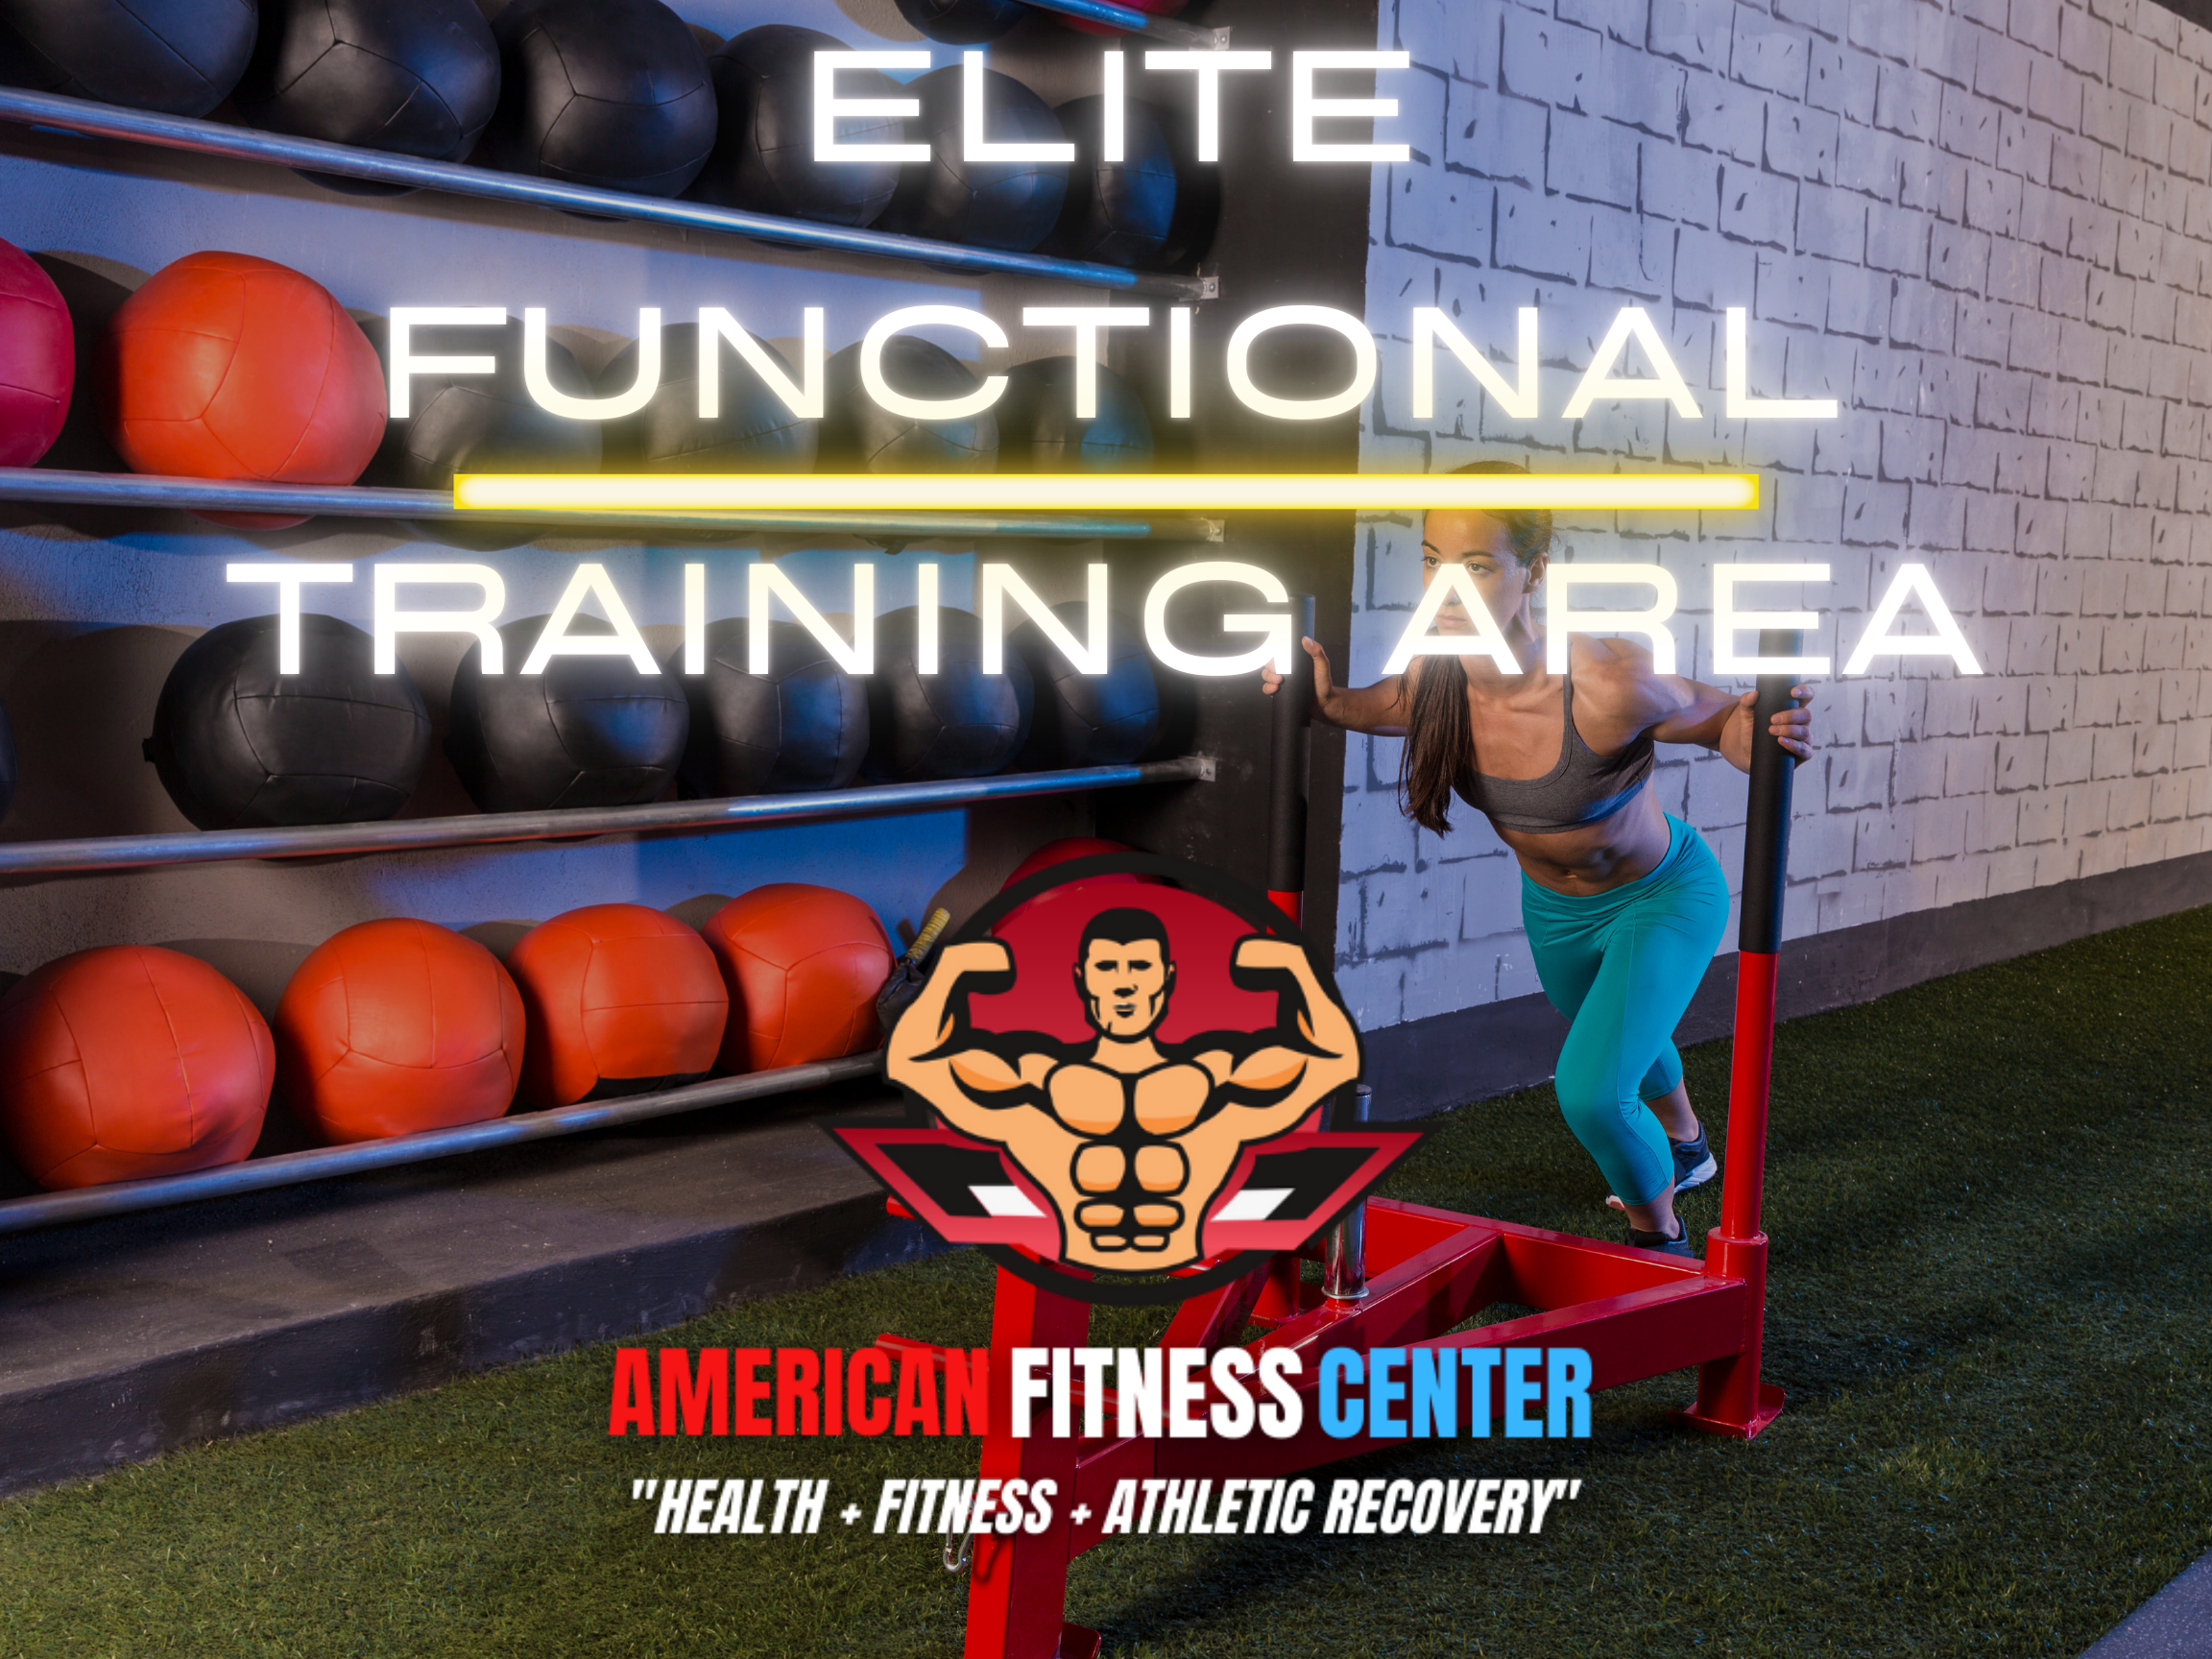 Elite-Functional-Turf-Training-Center-Near-Me-in-Peachtree-City-GA-American-Fitness-Center-Peachtree-City